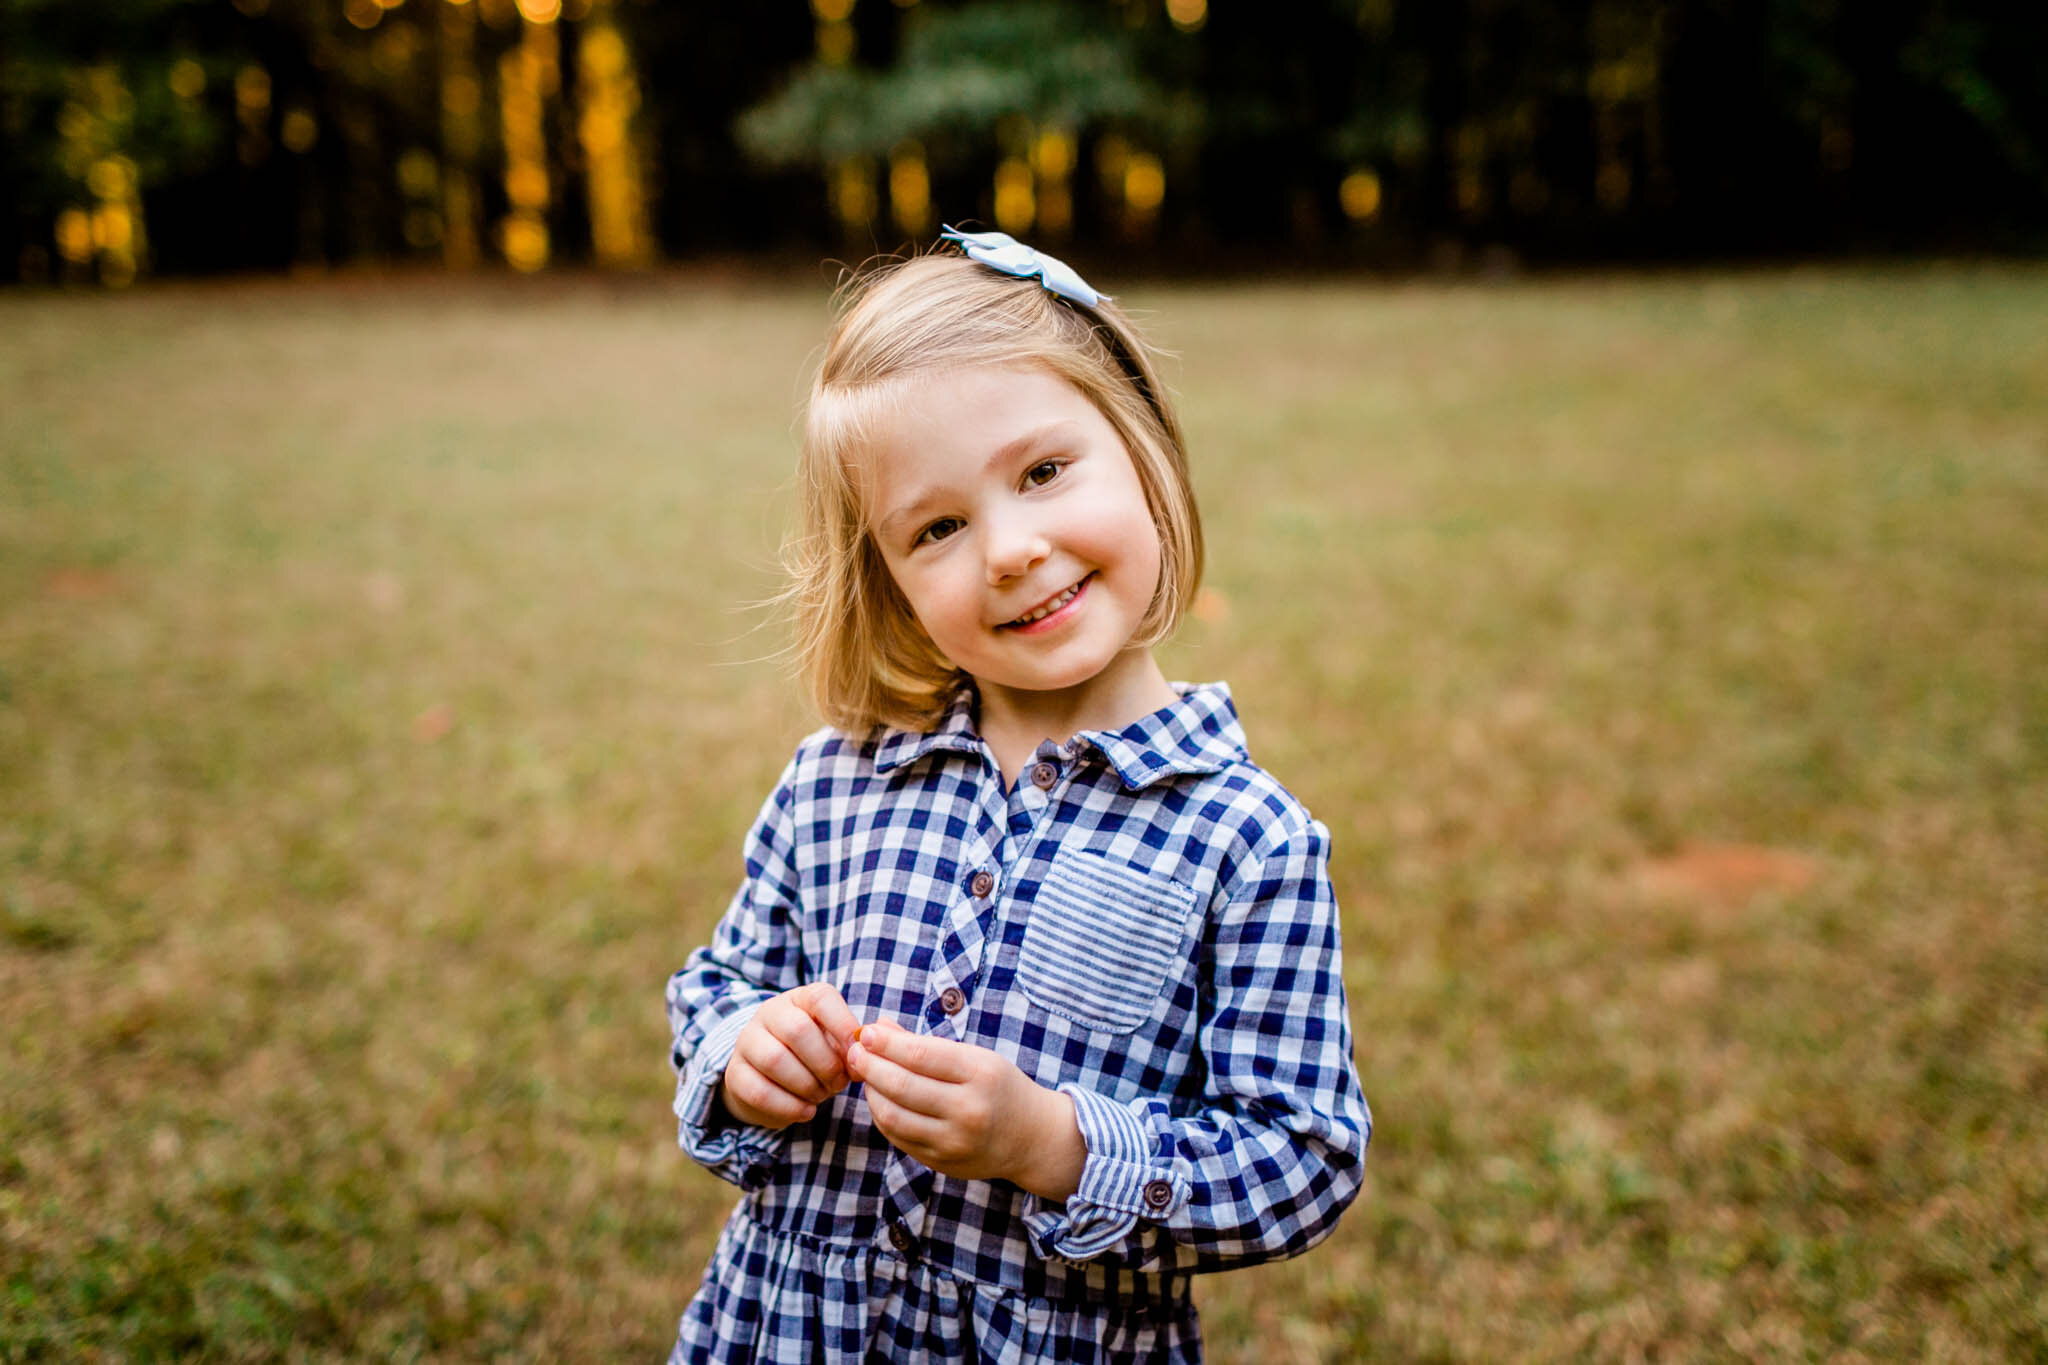 Raleigh Family Photographer | Umstead Park | By G. Lin Photography | Young girl smiling at camera